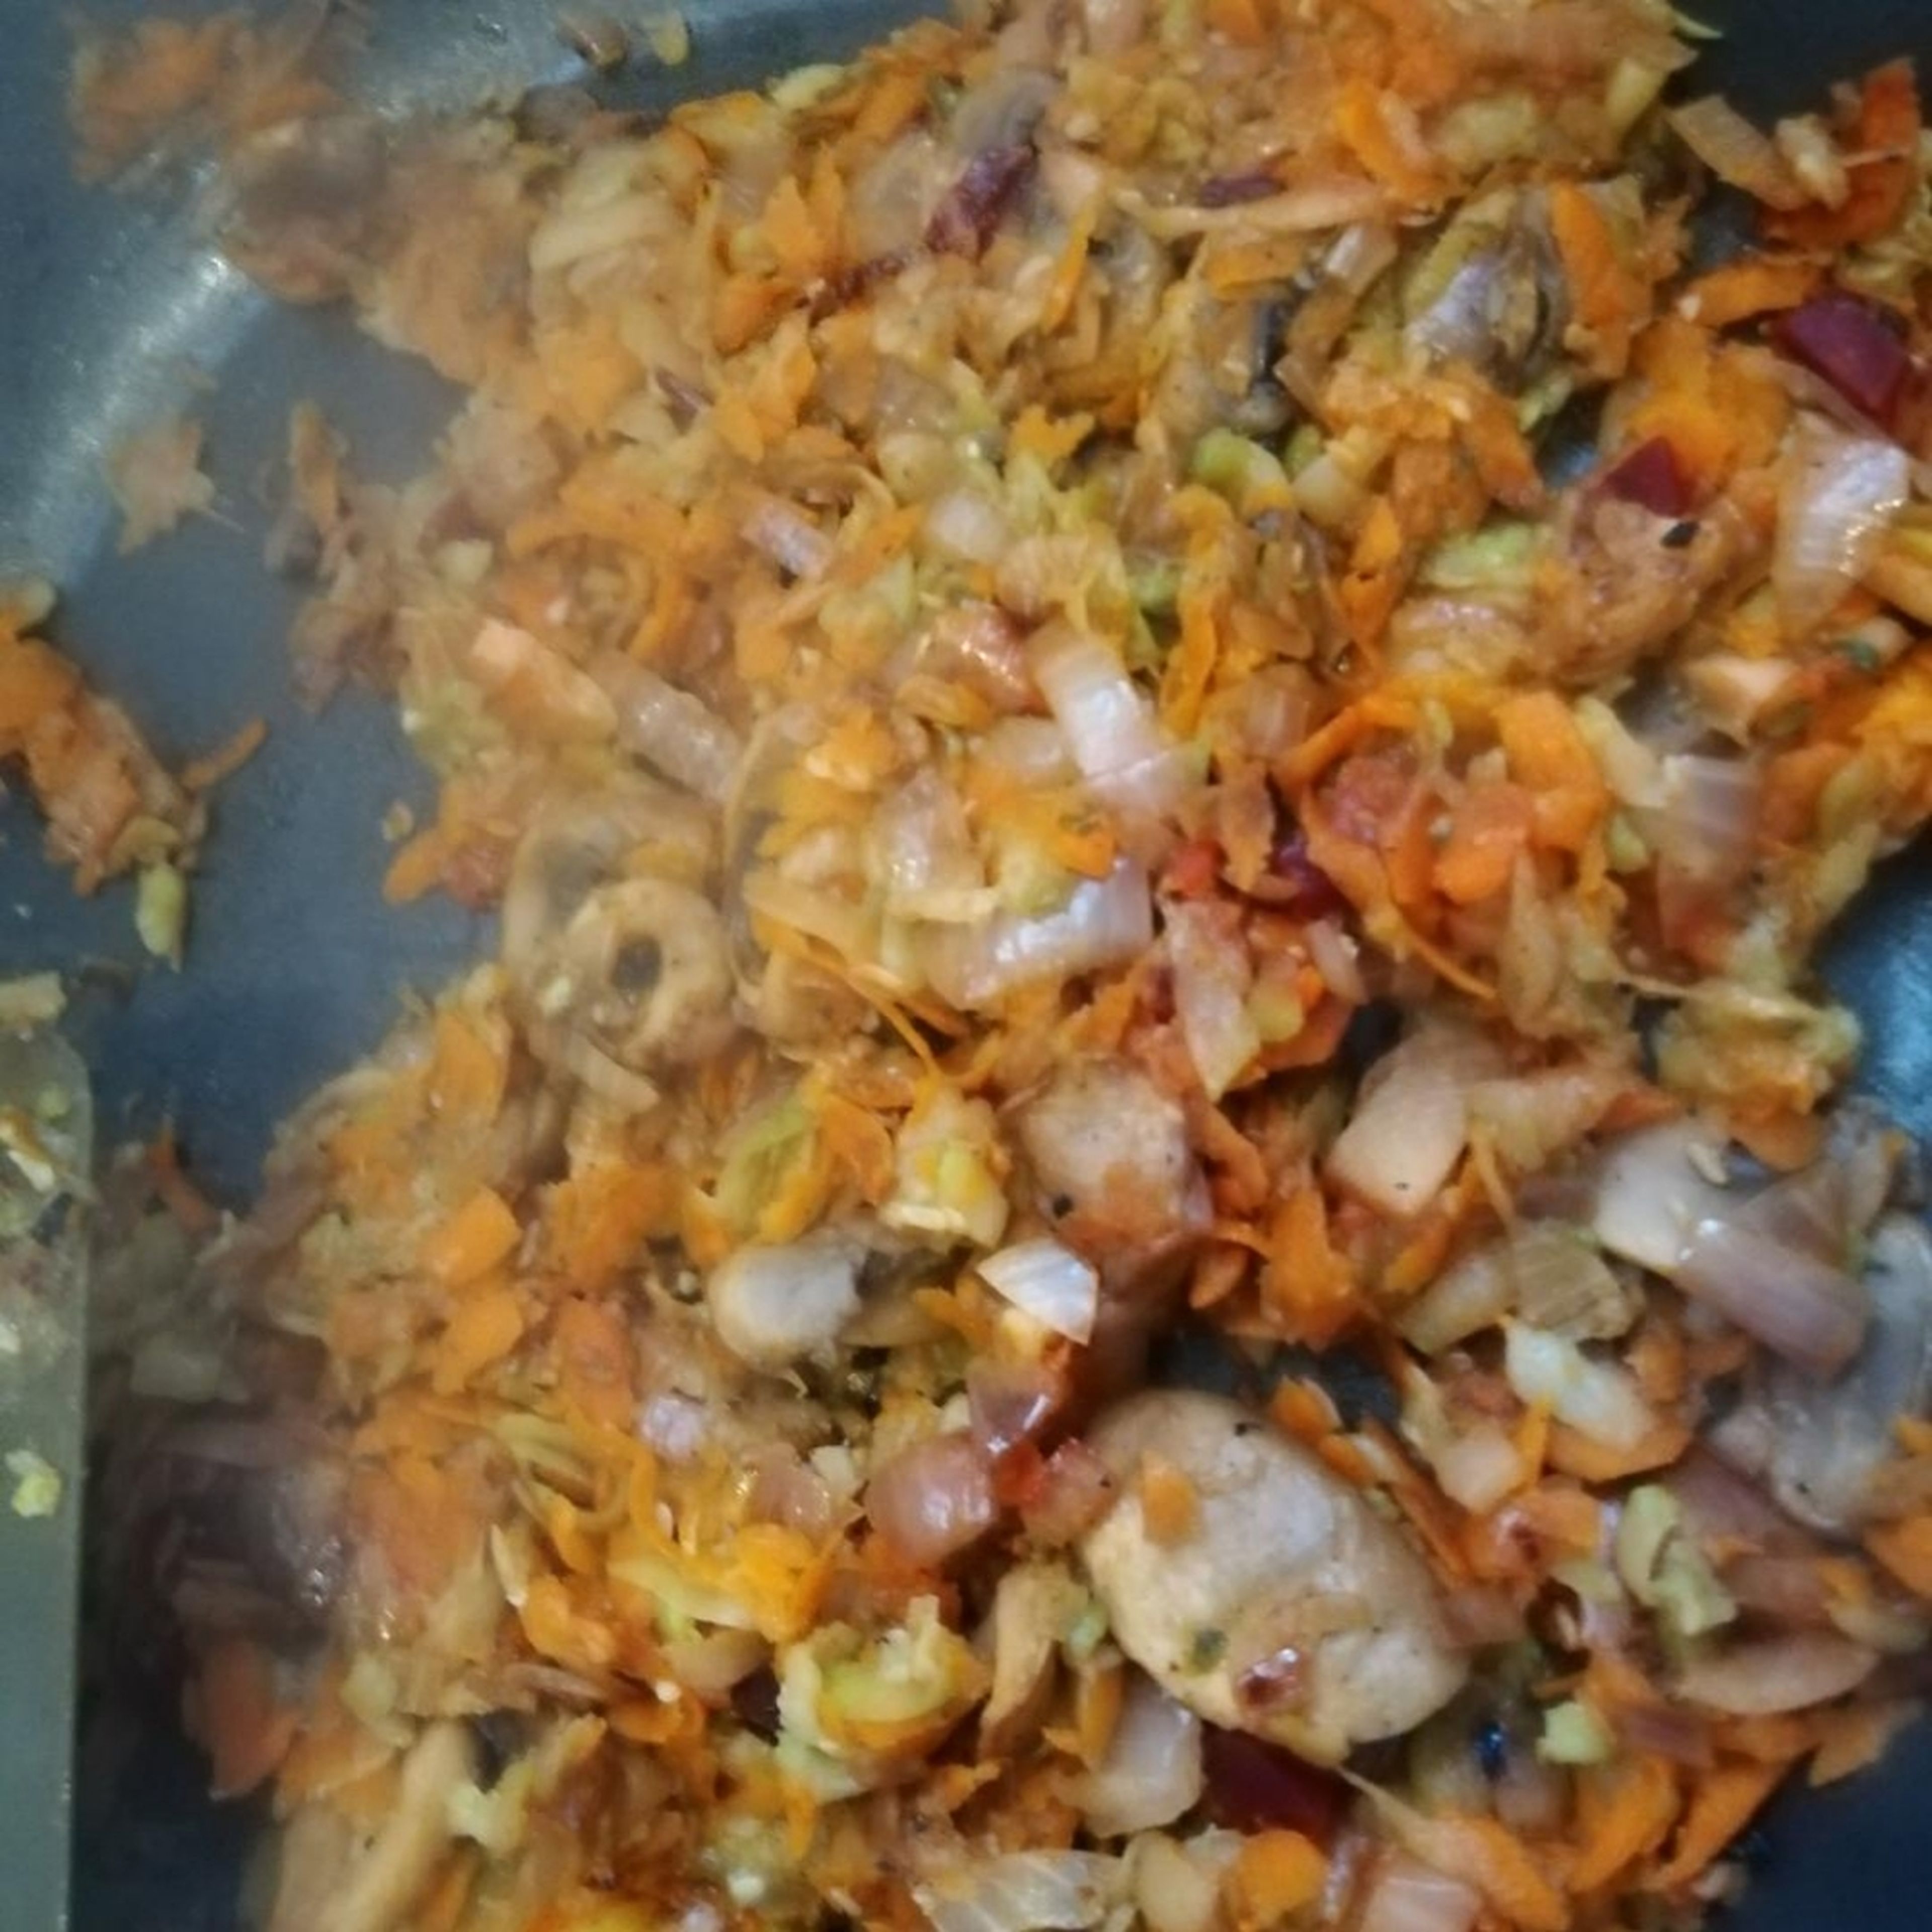 remove burger and put cutted onion, carrot, mashrom and zucchini untill cooked and add spices